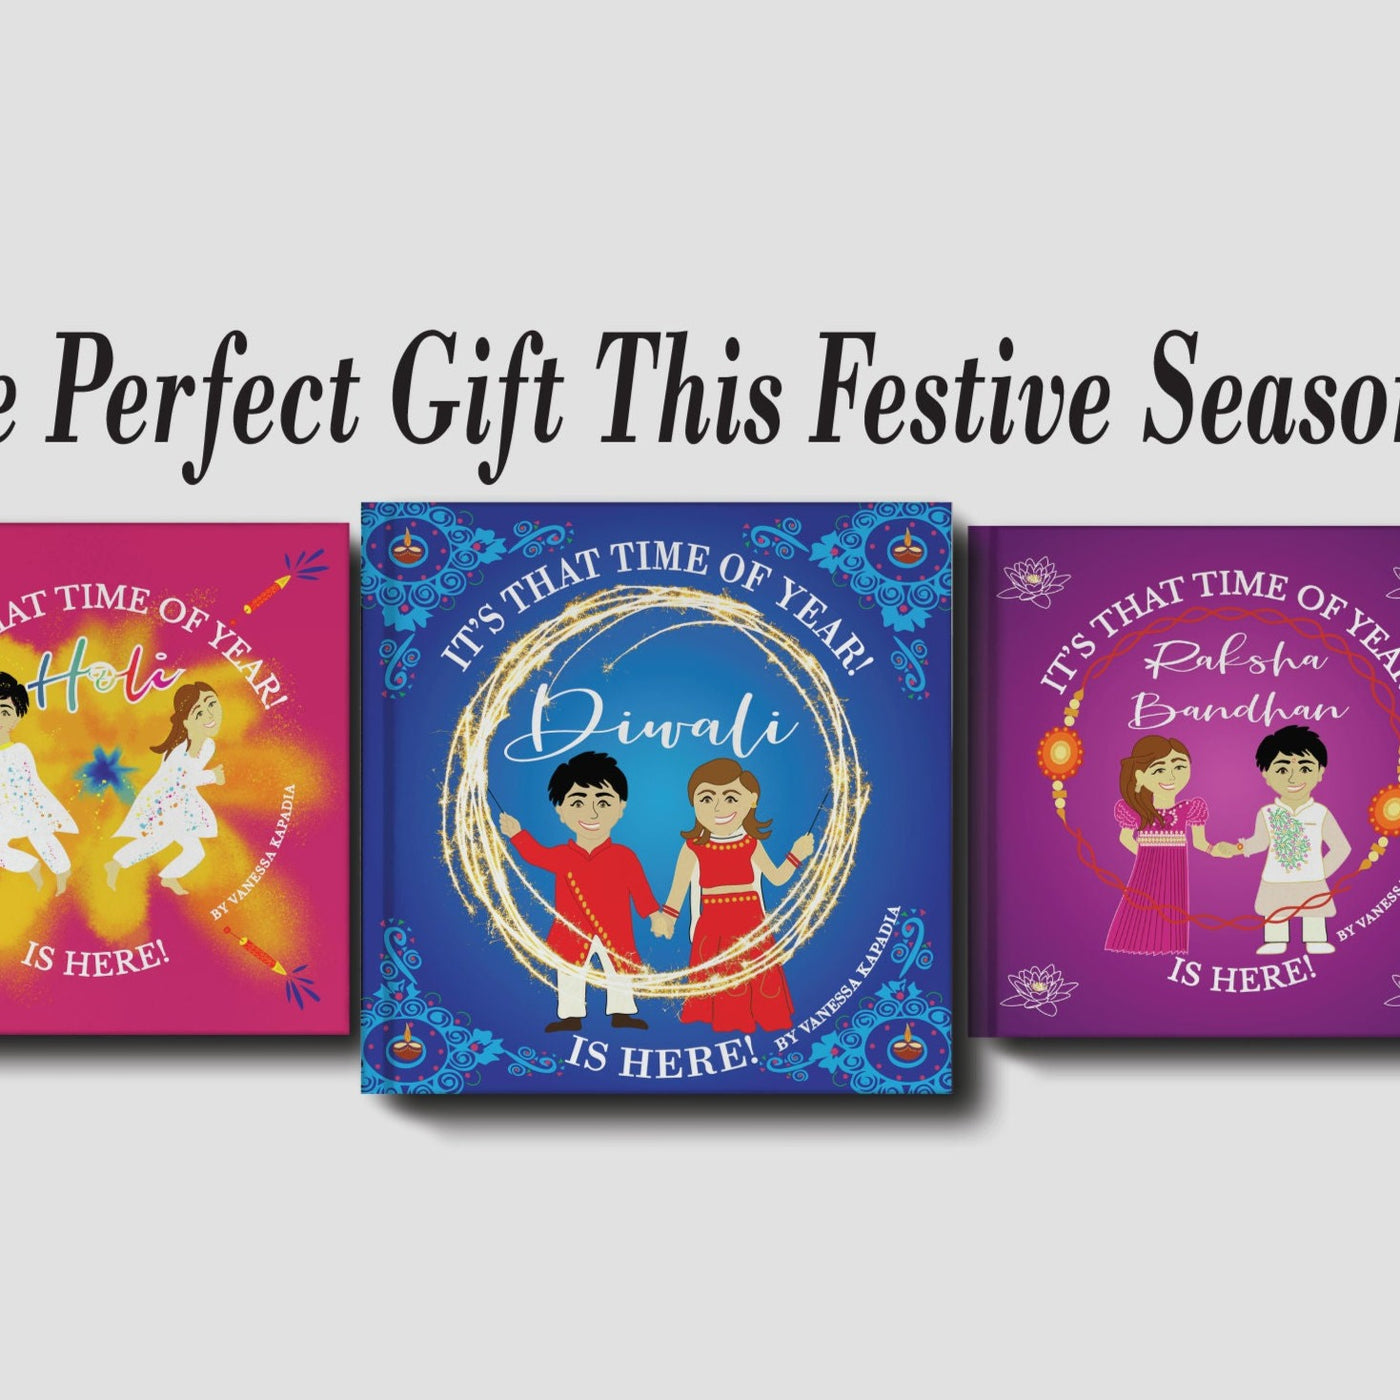 It's That Time of Year Series Exclusive Value Bundle- Paperback